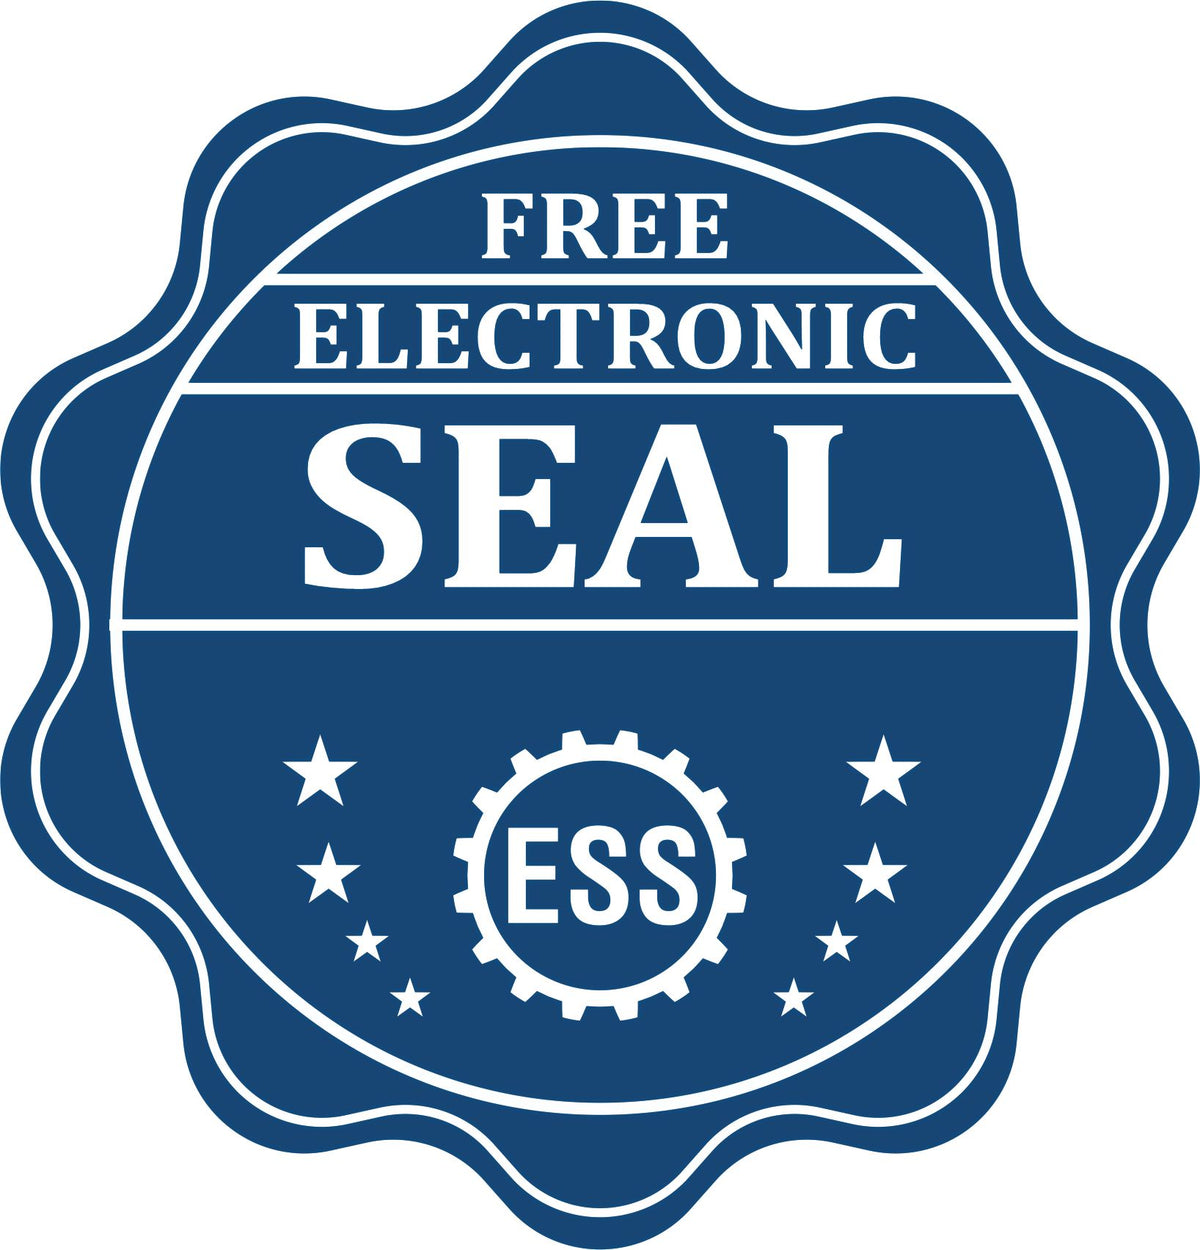 A badge showing a free electronic seal for the MaxLight Premium Pre-Inked Nevada State Seal Notarial Stamp with stars and the ESS gear on the emblem.